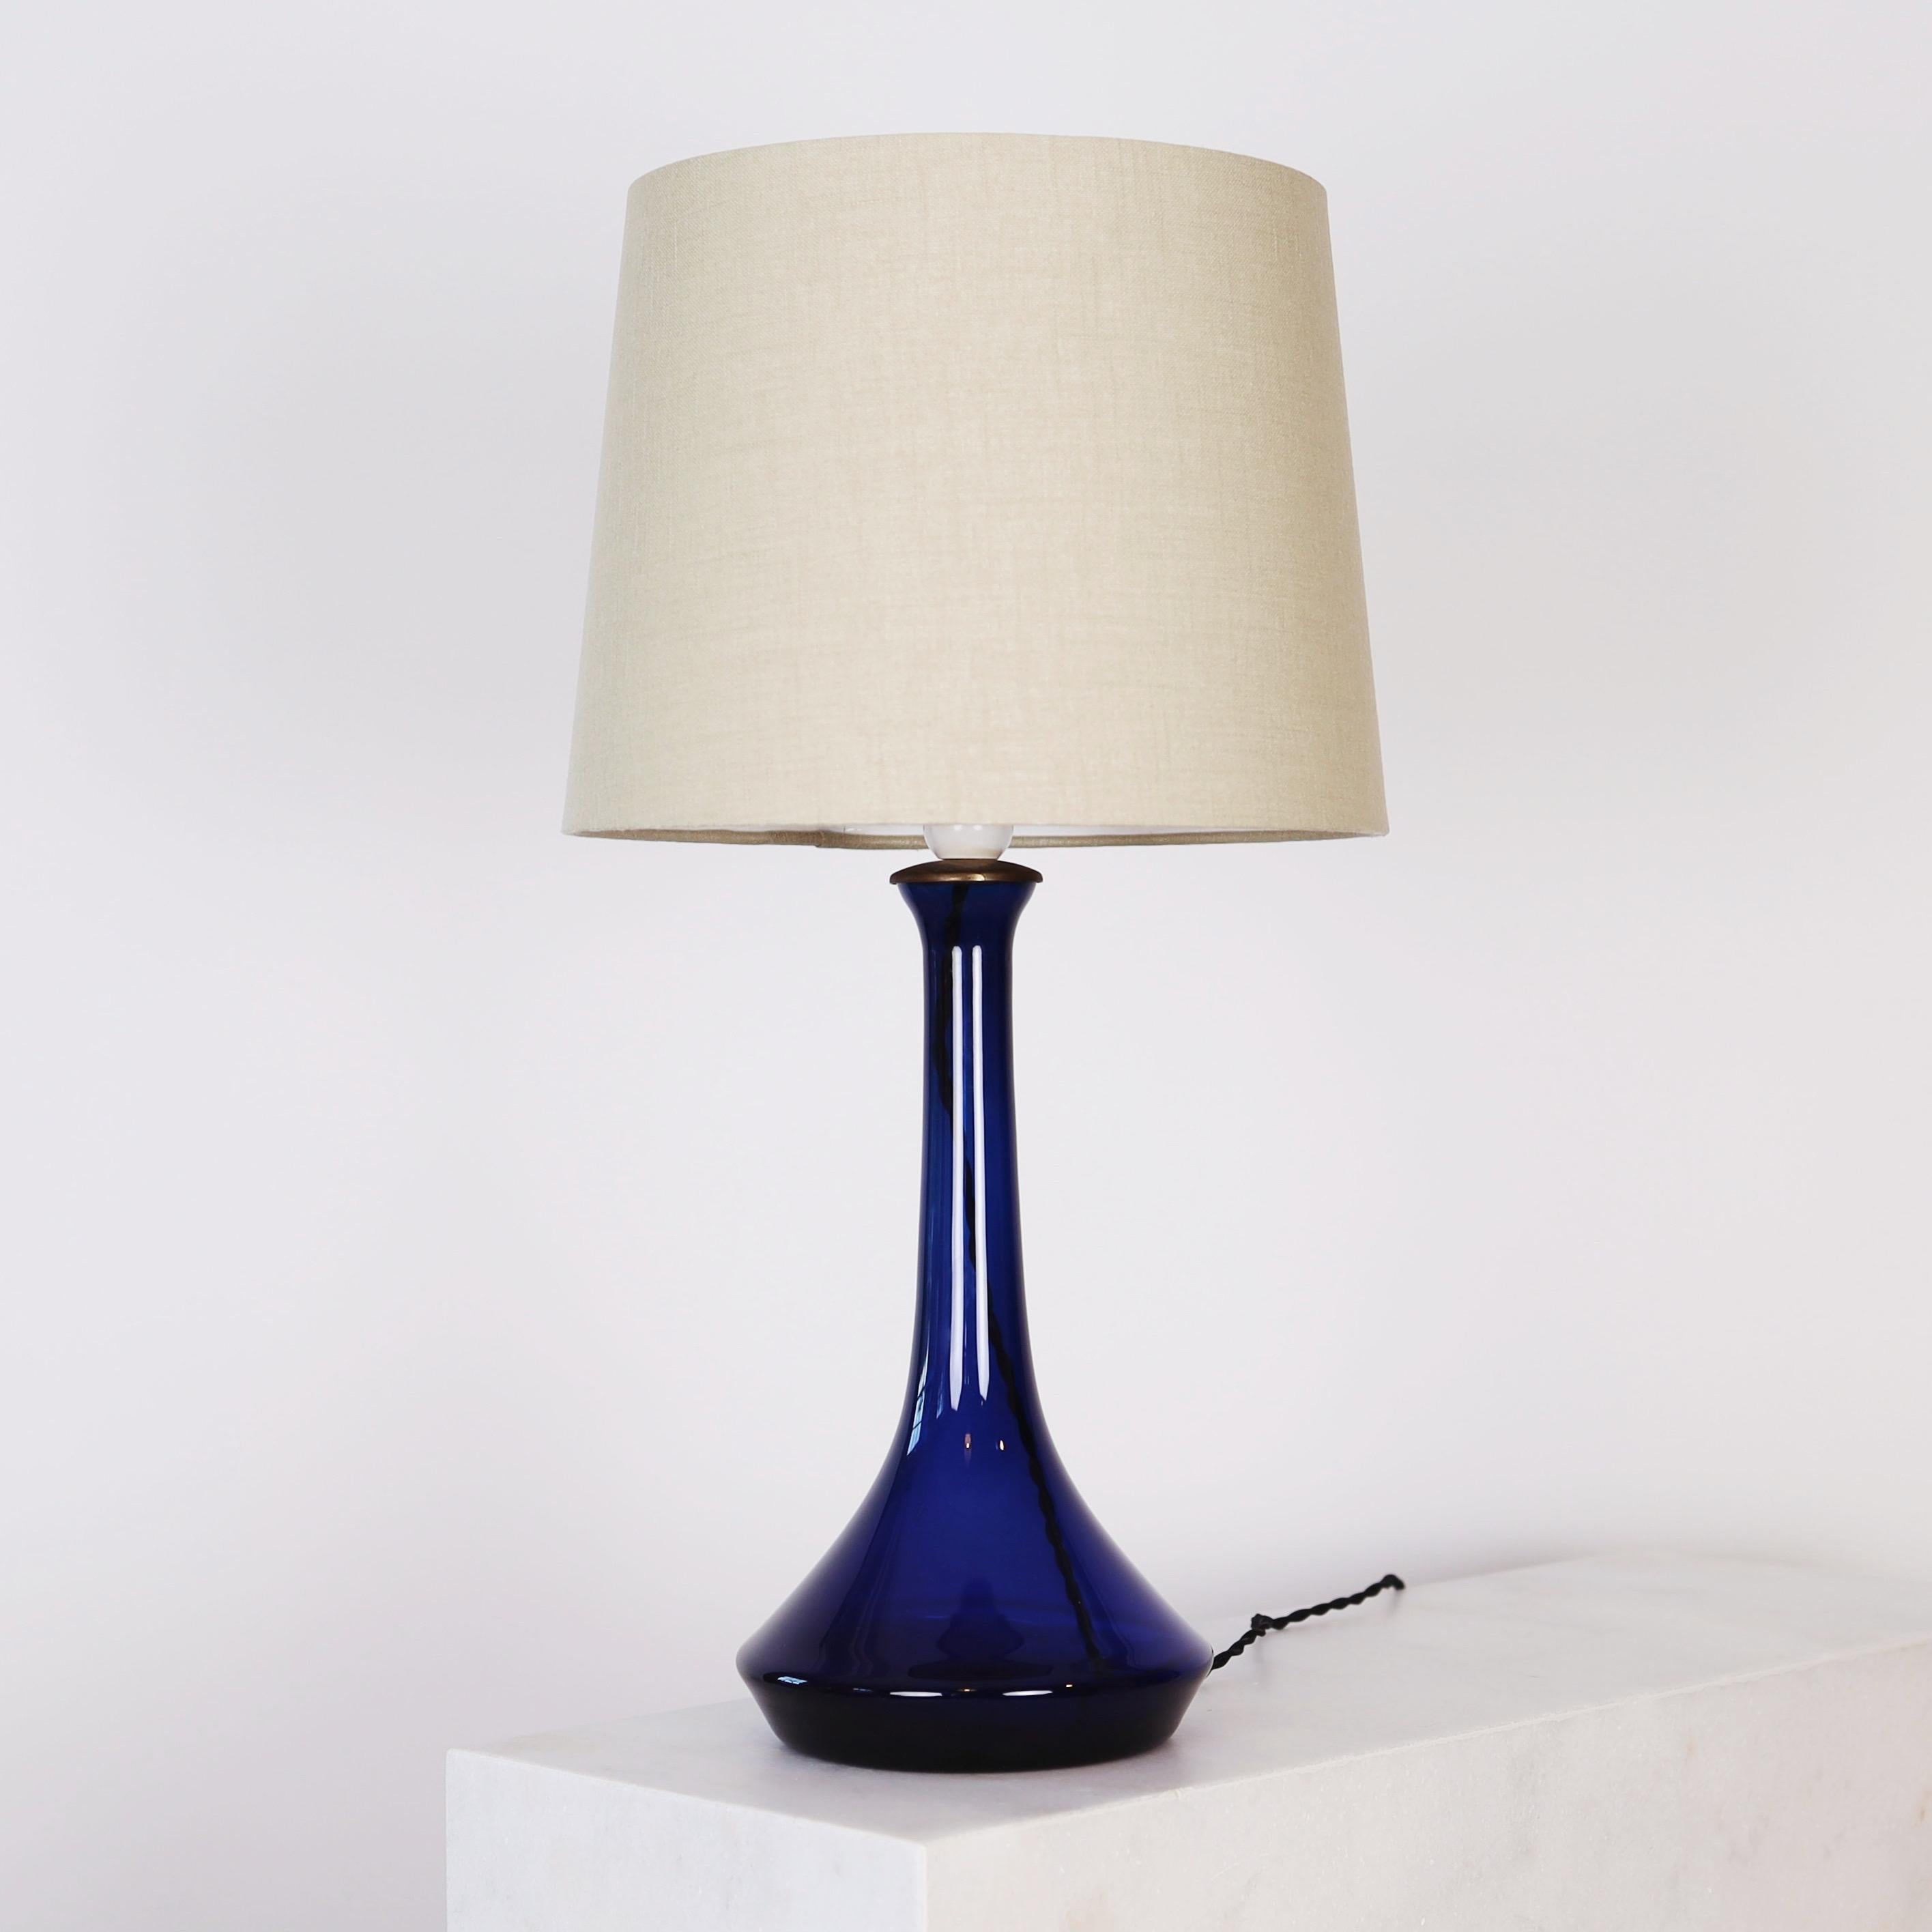 A dark blue glass desk lamp designed by Lisbeth Brams in 1966 for Fog & Mørup. The eye-catching piece is one of three in her trio for Fog & Mørup. We have the trio available. 

* A dark blue glass table lamp with a brass top and a beige fabric